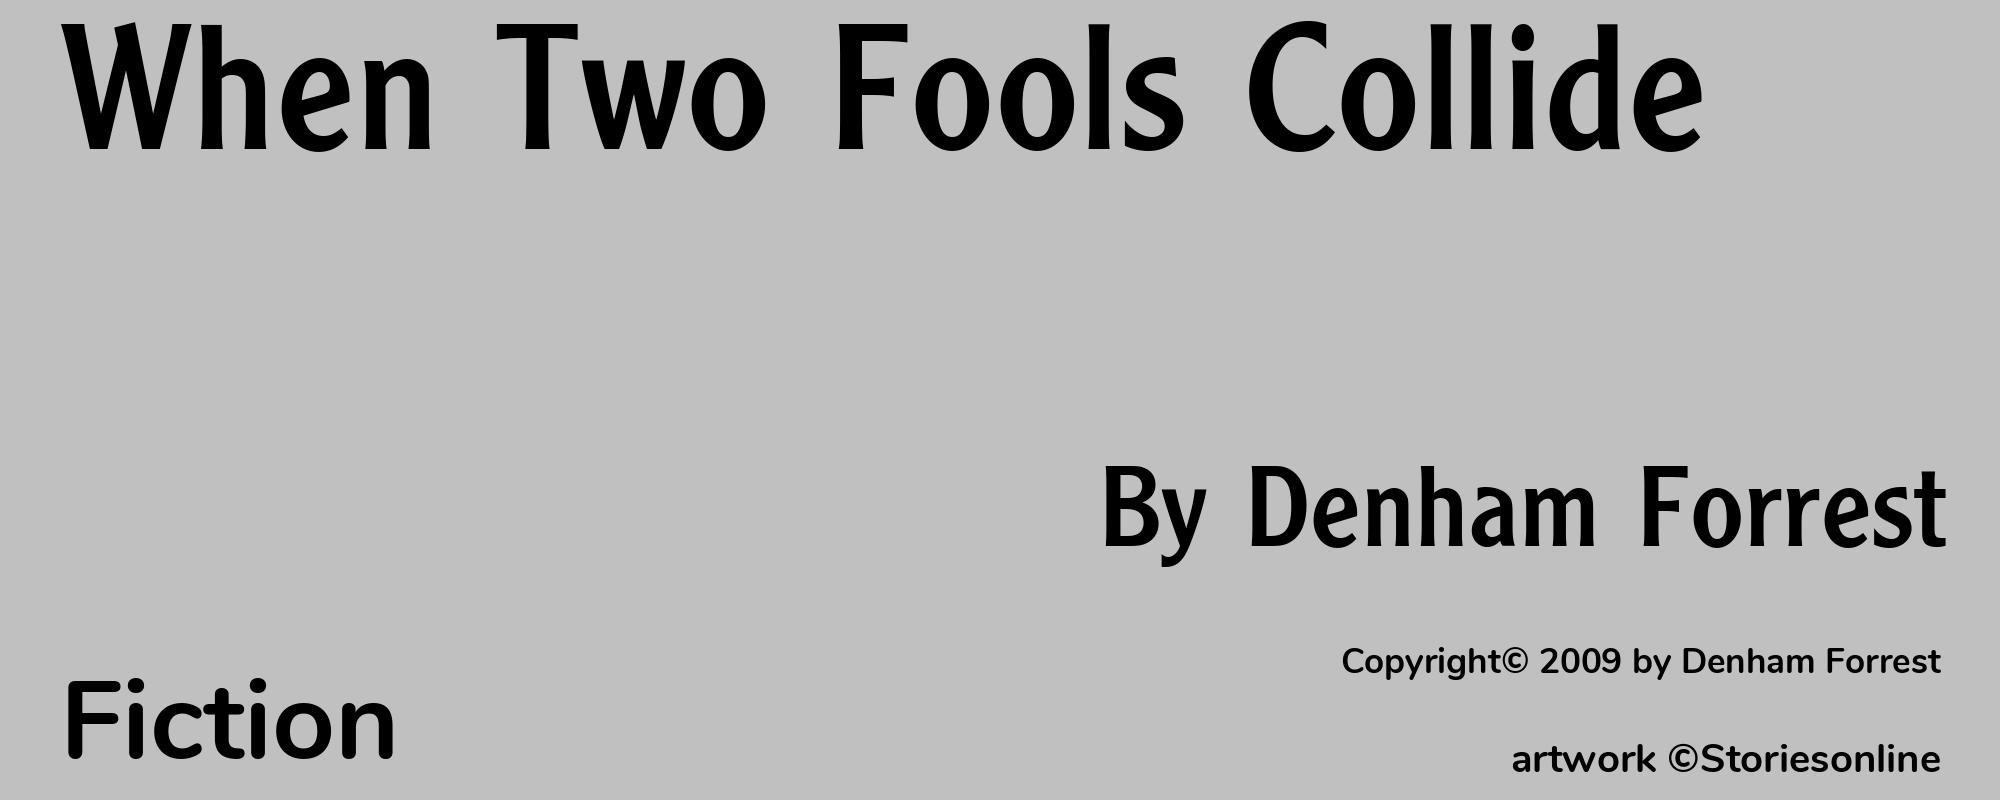 When Two Fools Collide - Cover